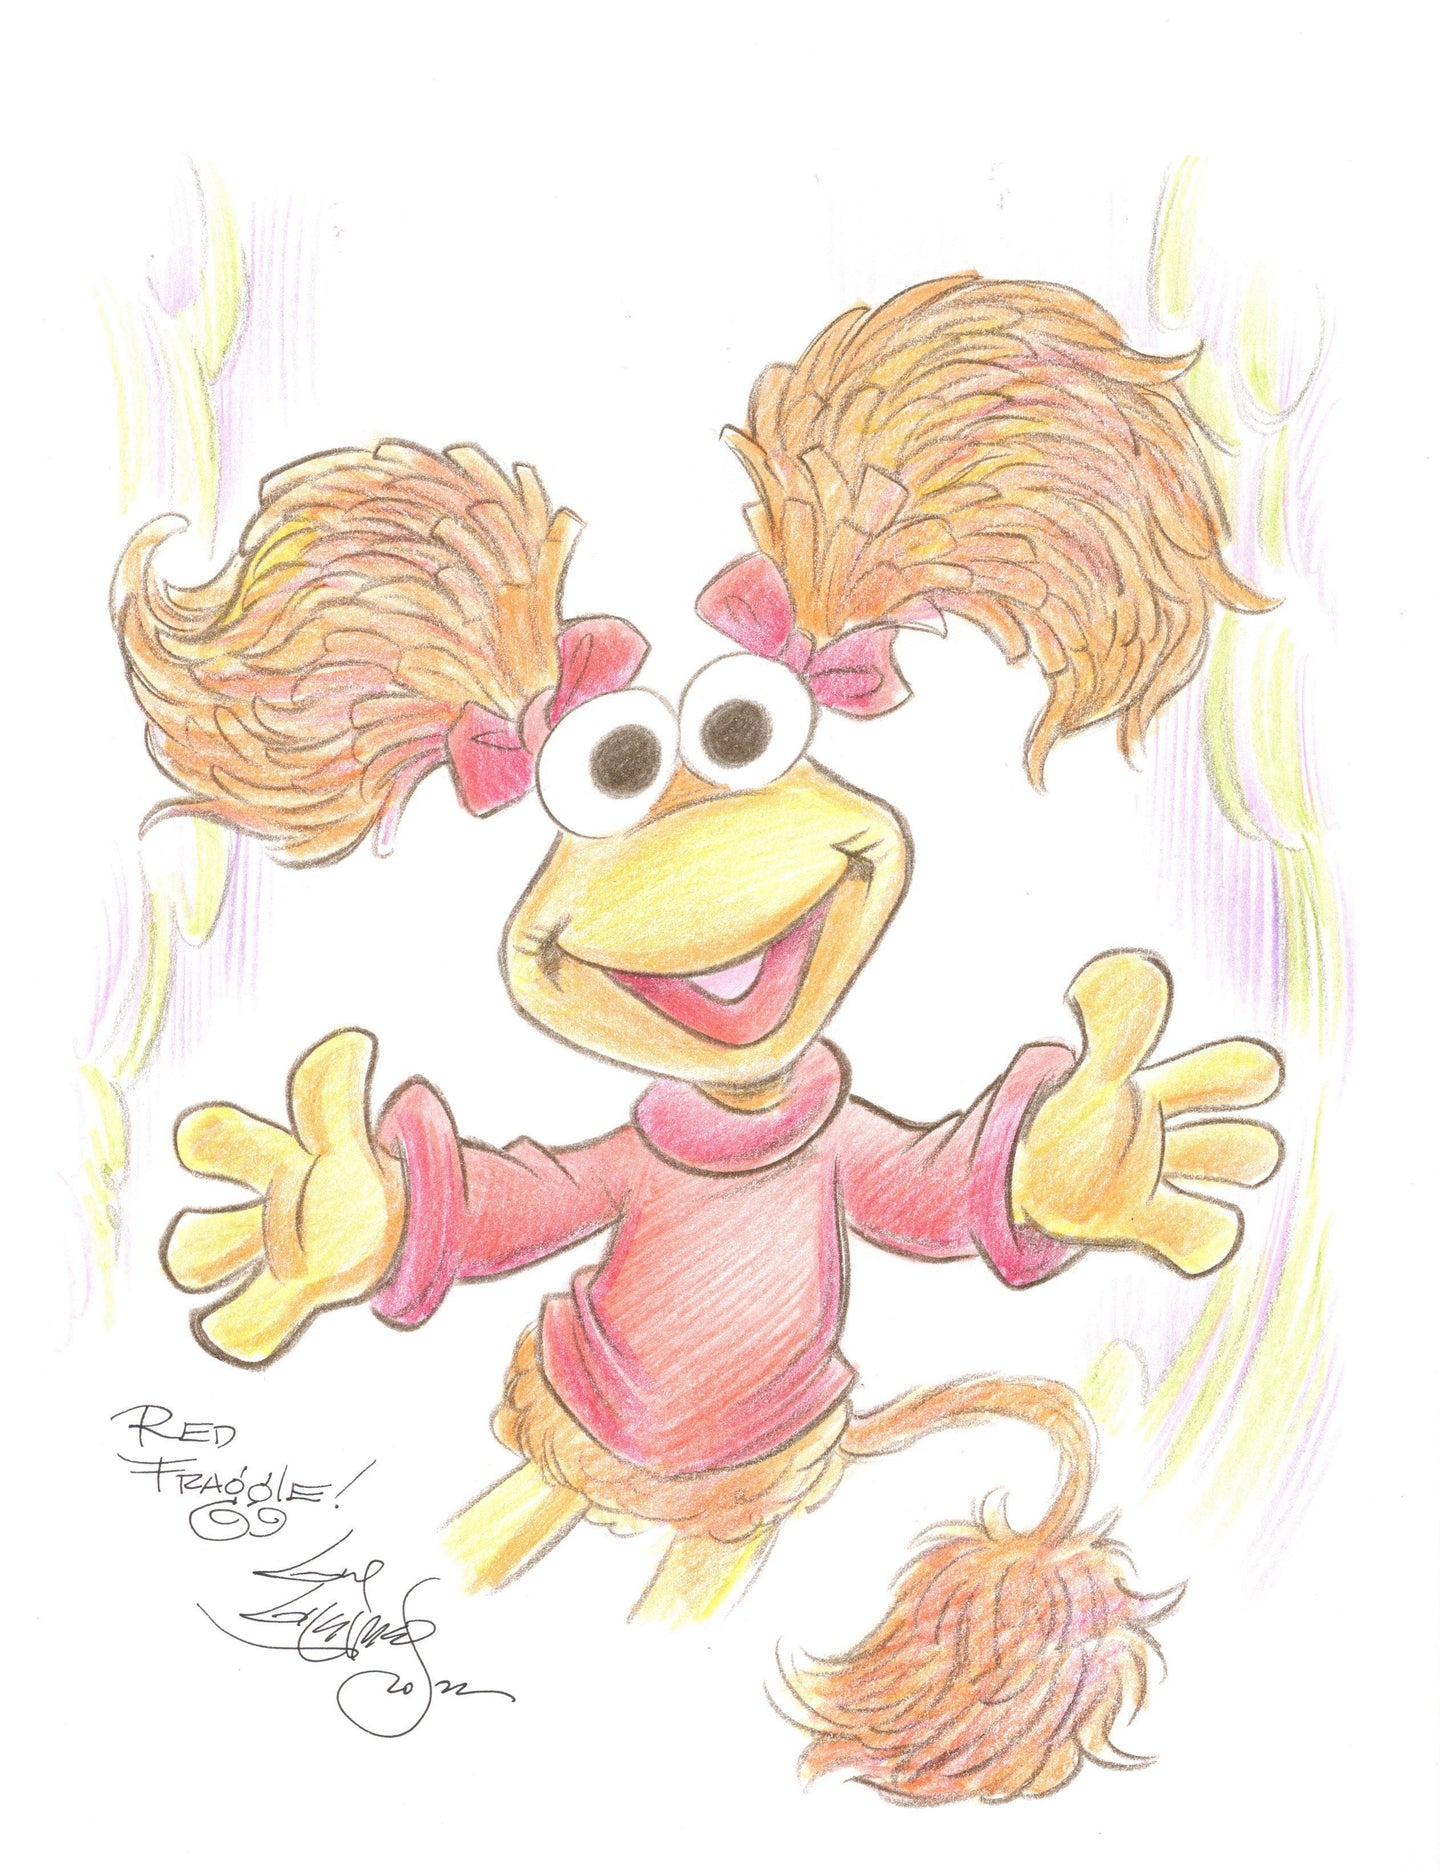 Fraggle Rock Red Original Art 8.5x11 Sketch  - Created by Guy Gilchrist